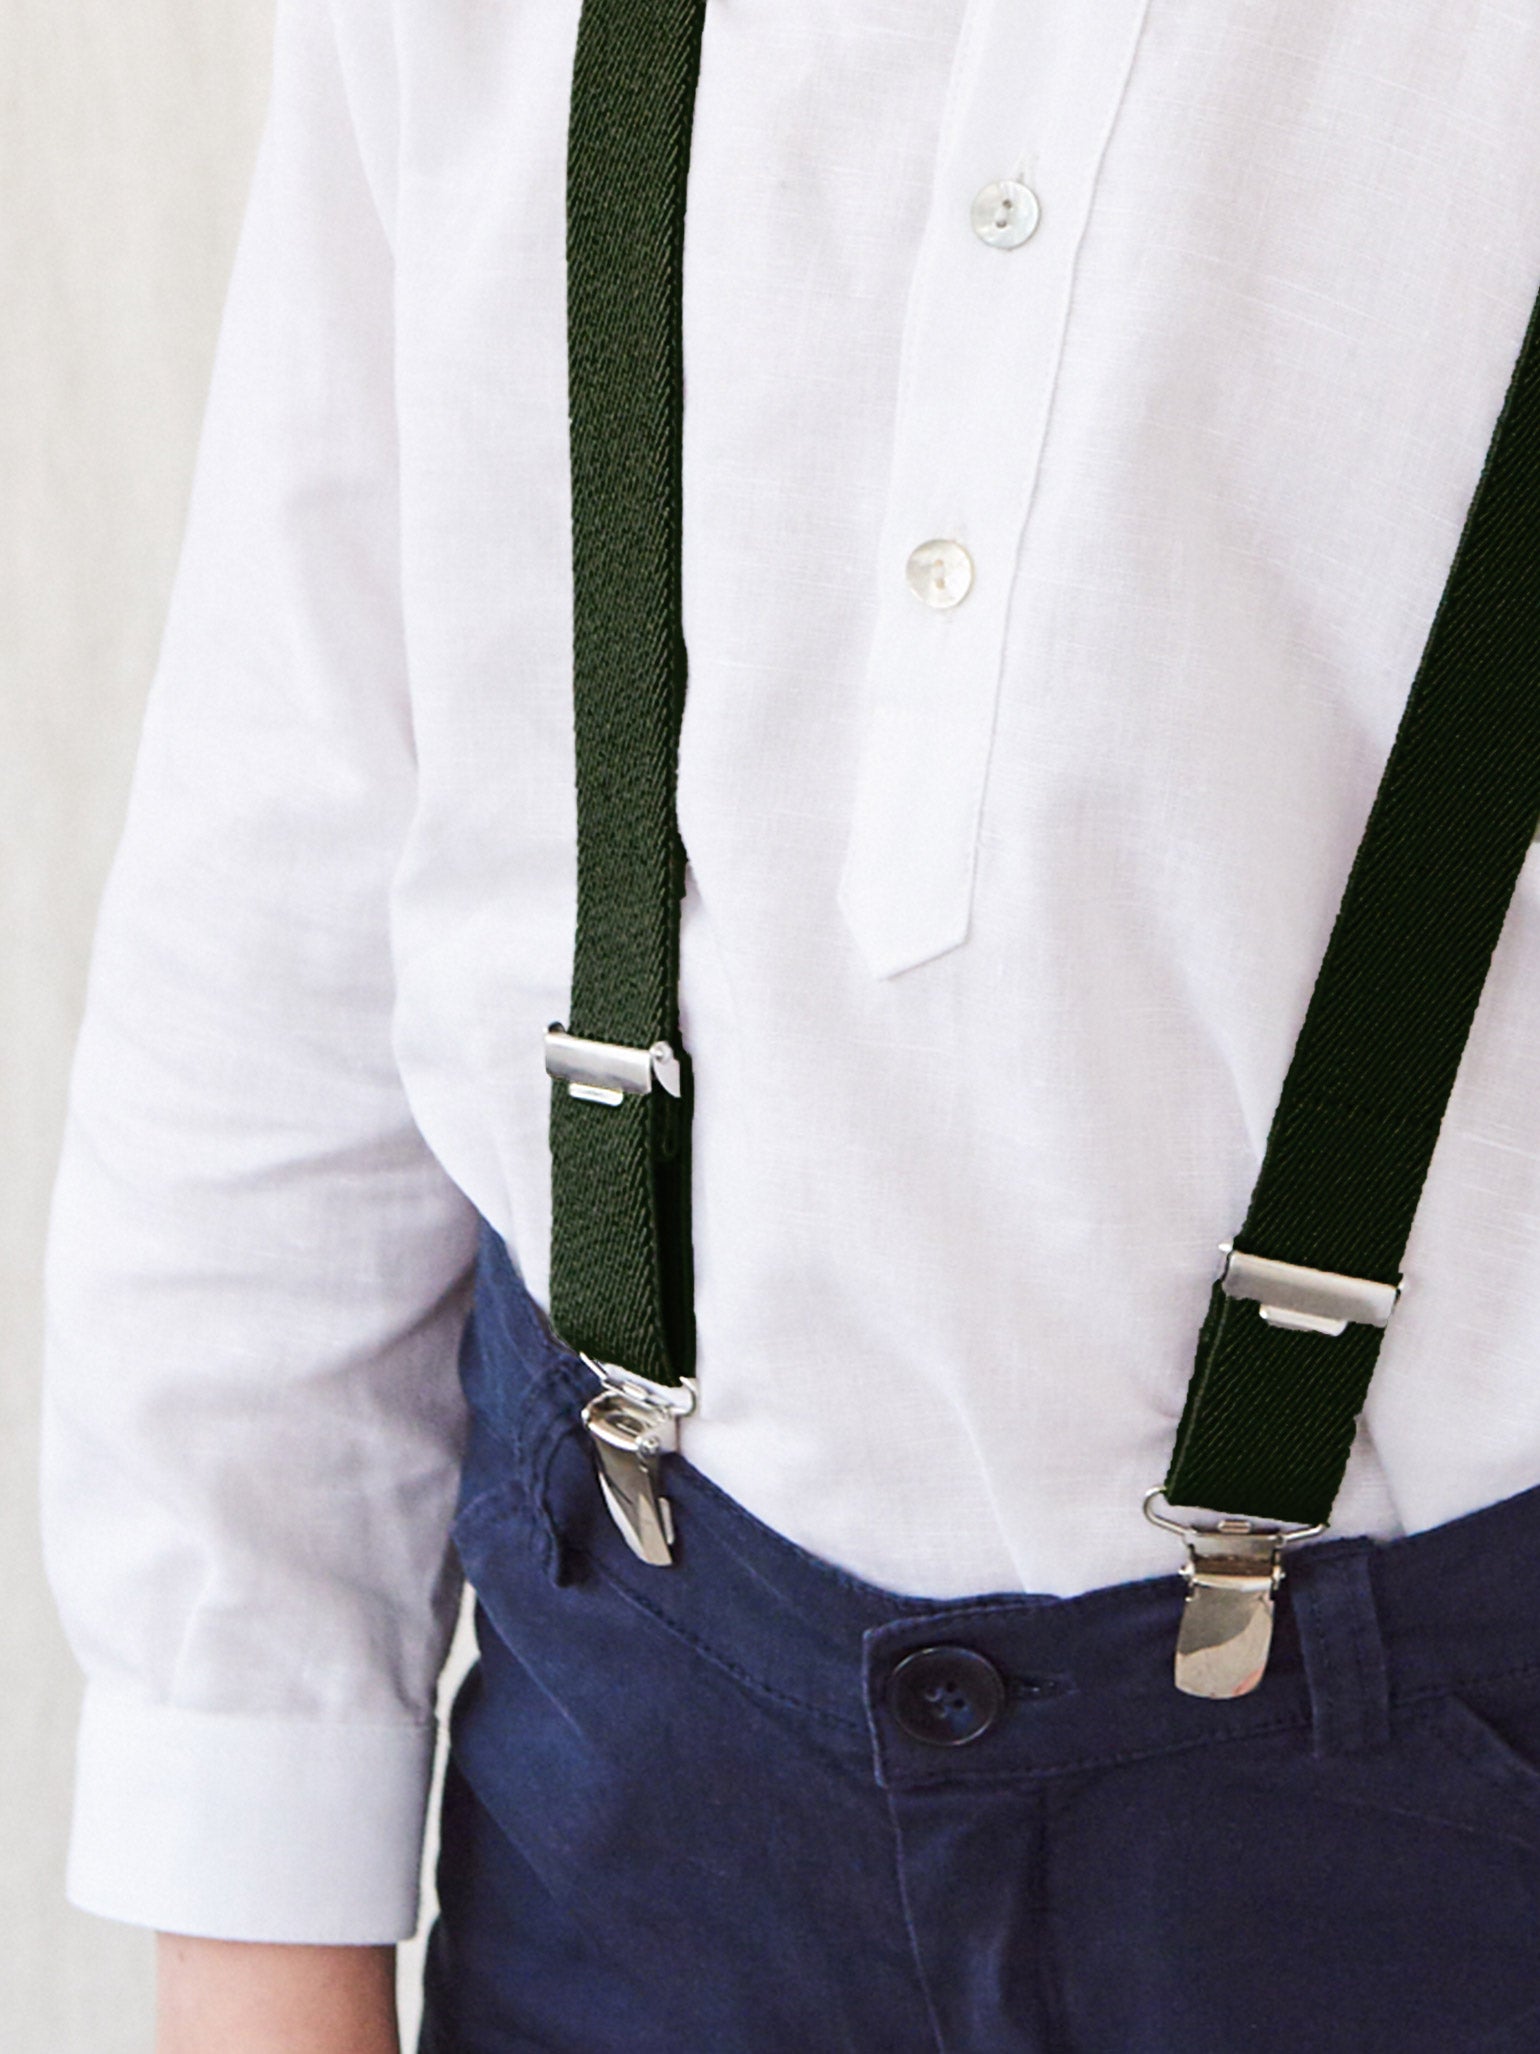 High Elastic Adjustable Strap On Suspenders With 4 Strong Clips For Heavy  Duty X Back Trousers, Brace Pants, And Wedding Wear Mens Holder 230729 From  Jiao07, $9.53 | DHgate.Com